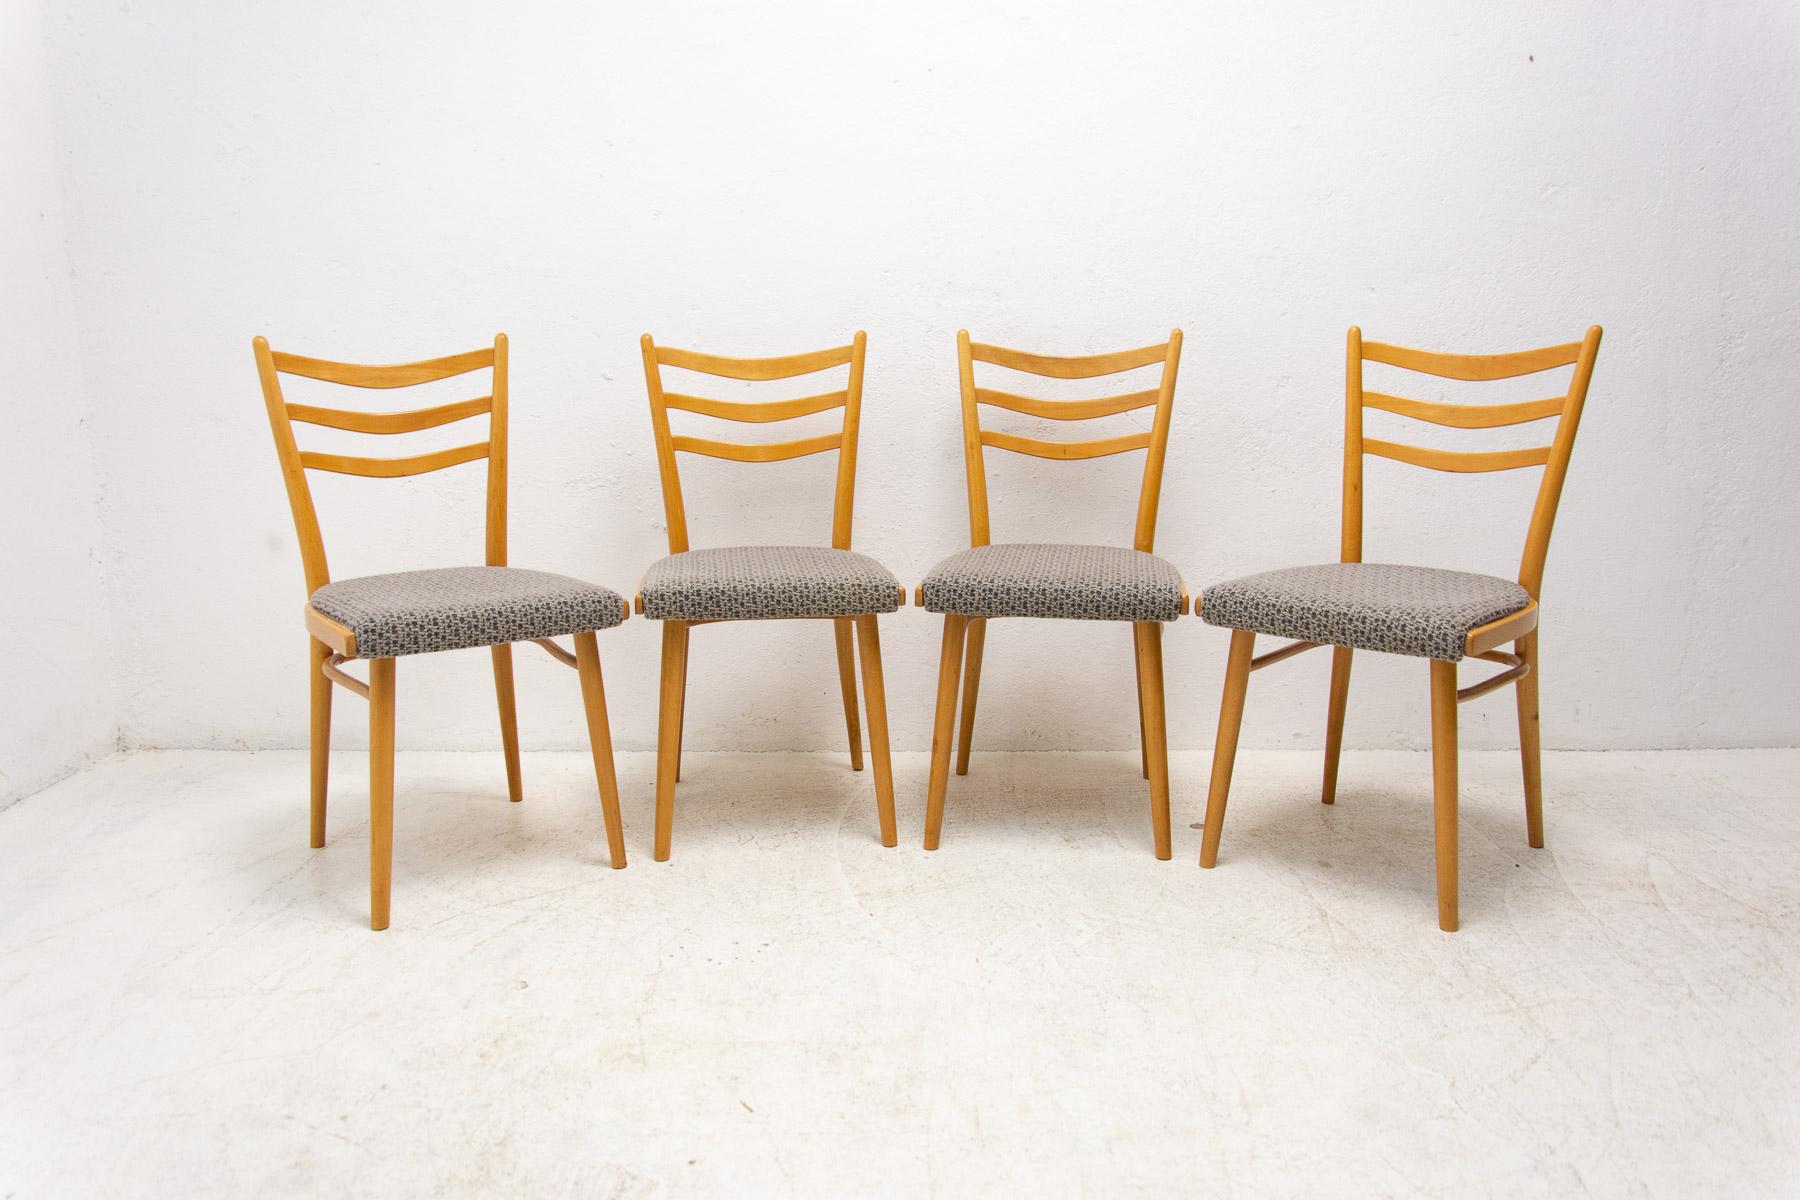 Set of four upholstered dining chairs, made in the former Czechoslovakia by Jitona company in the 1960s. The chairs are constructed of beech wood. Very interesting shaping. The upholstery and wood are in good Vintage condition, shows slight signs of